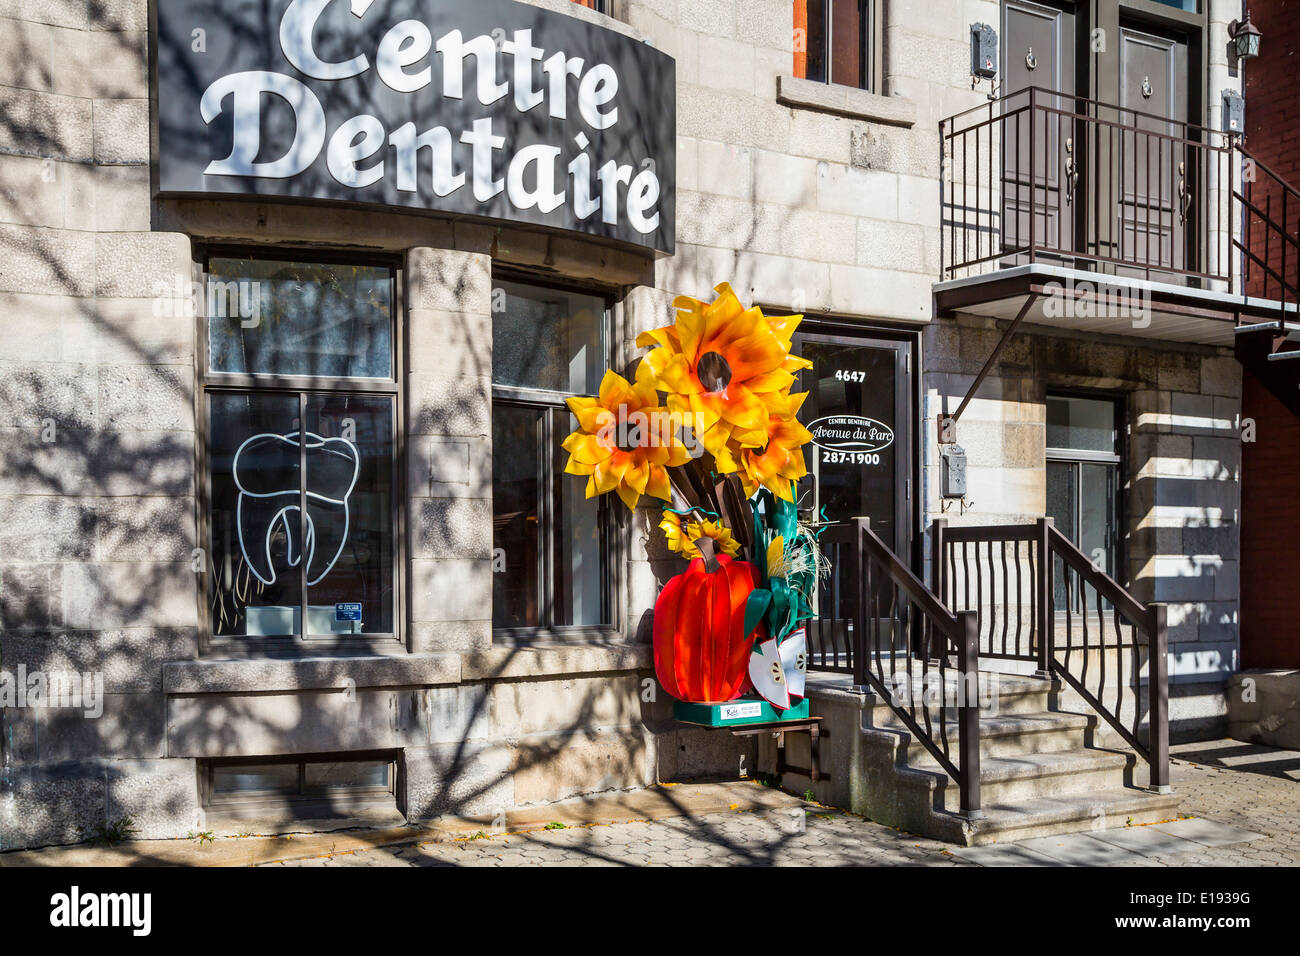 A Dental Center storefront in the old city of Montreal, Quebec, Canada. Stock Photo